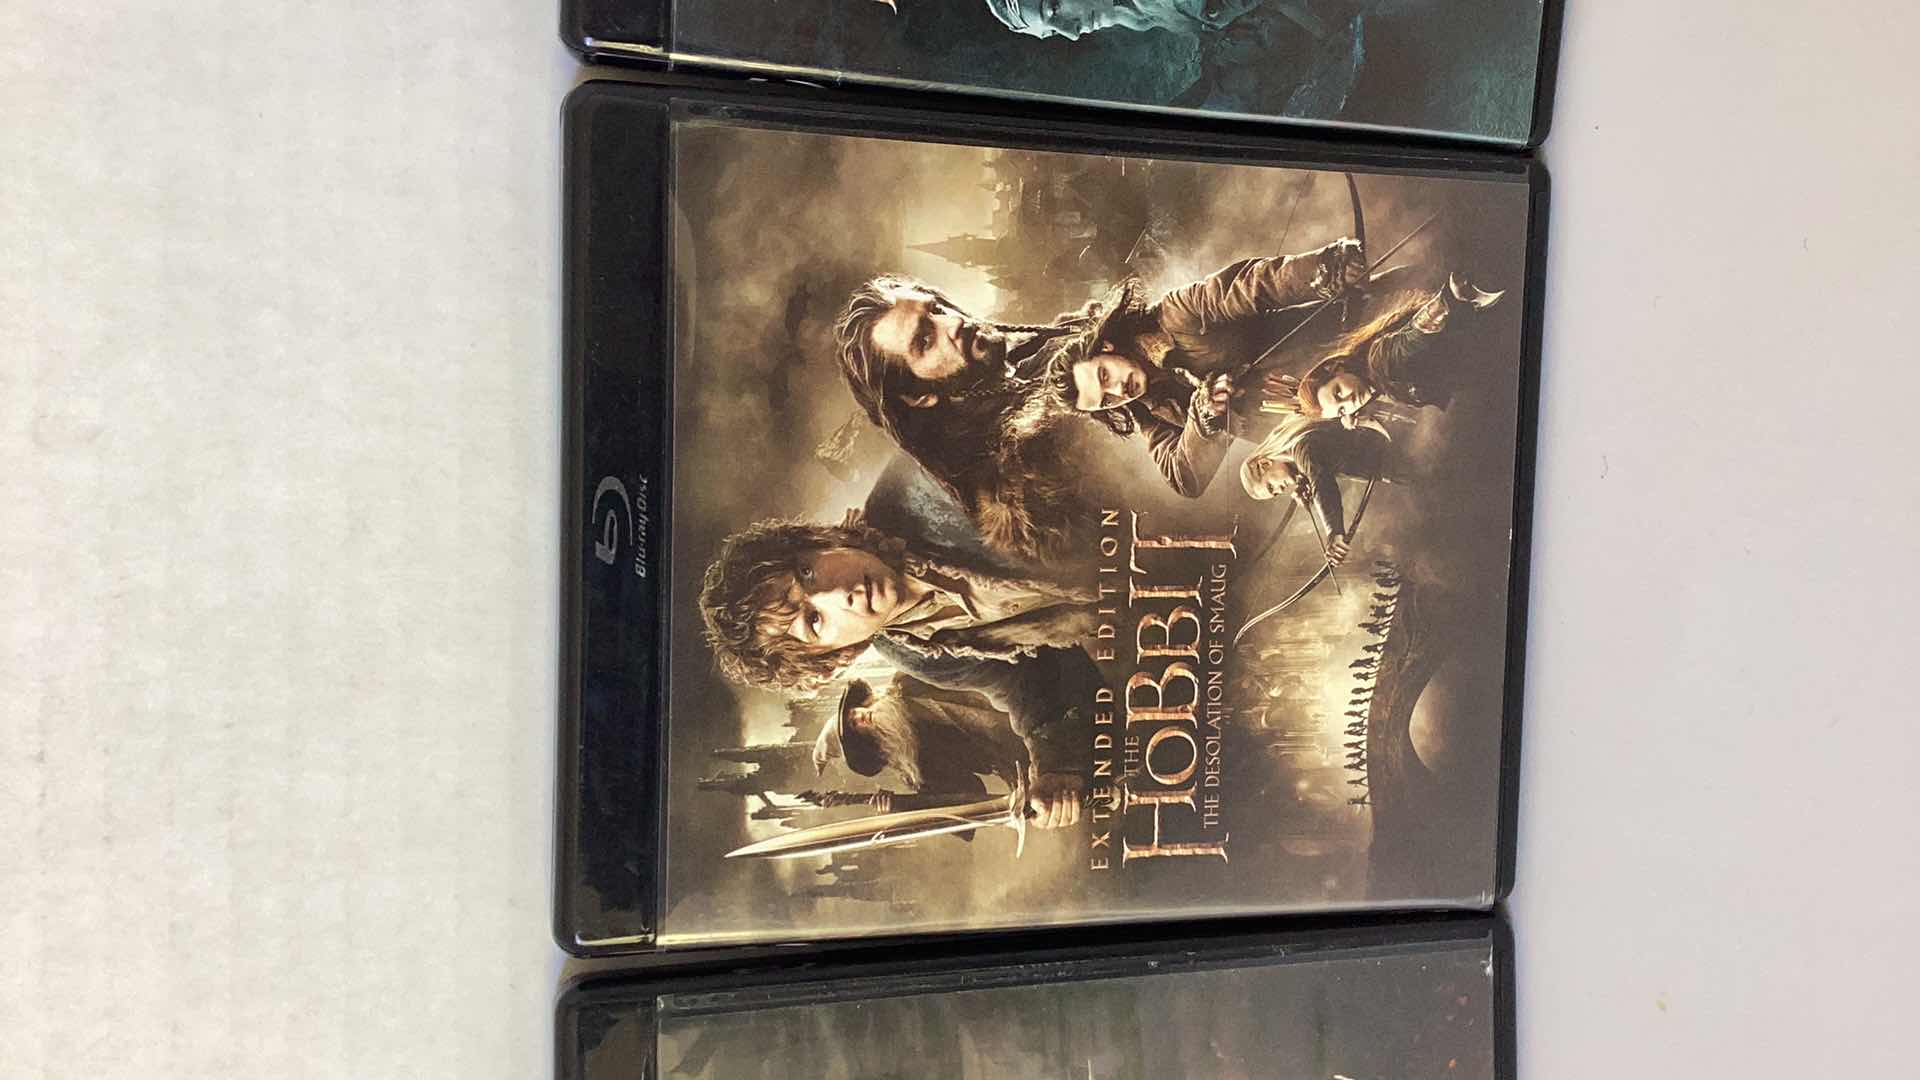 Photo 3 of 3 EXTENDED EDITION HOBBIT MOVIES